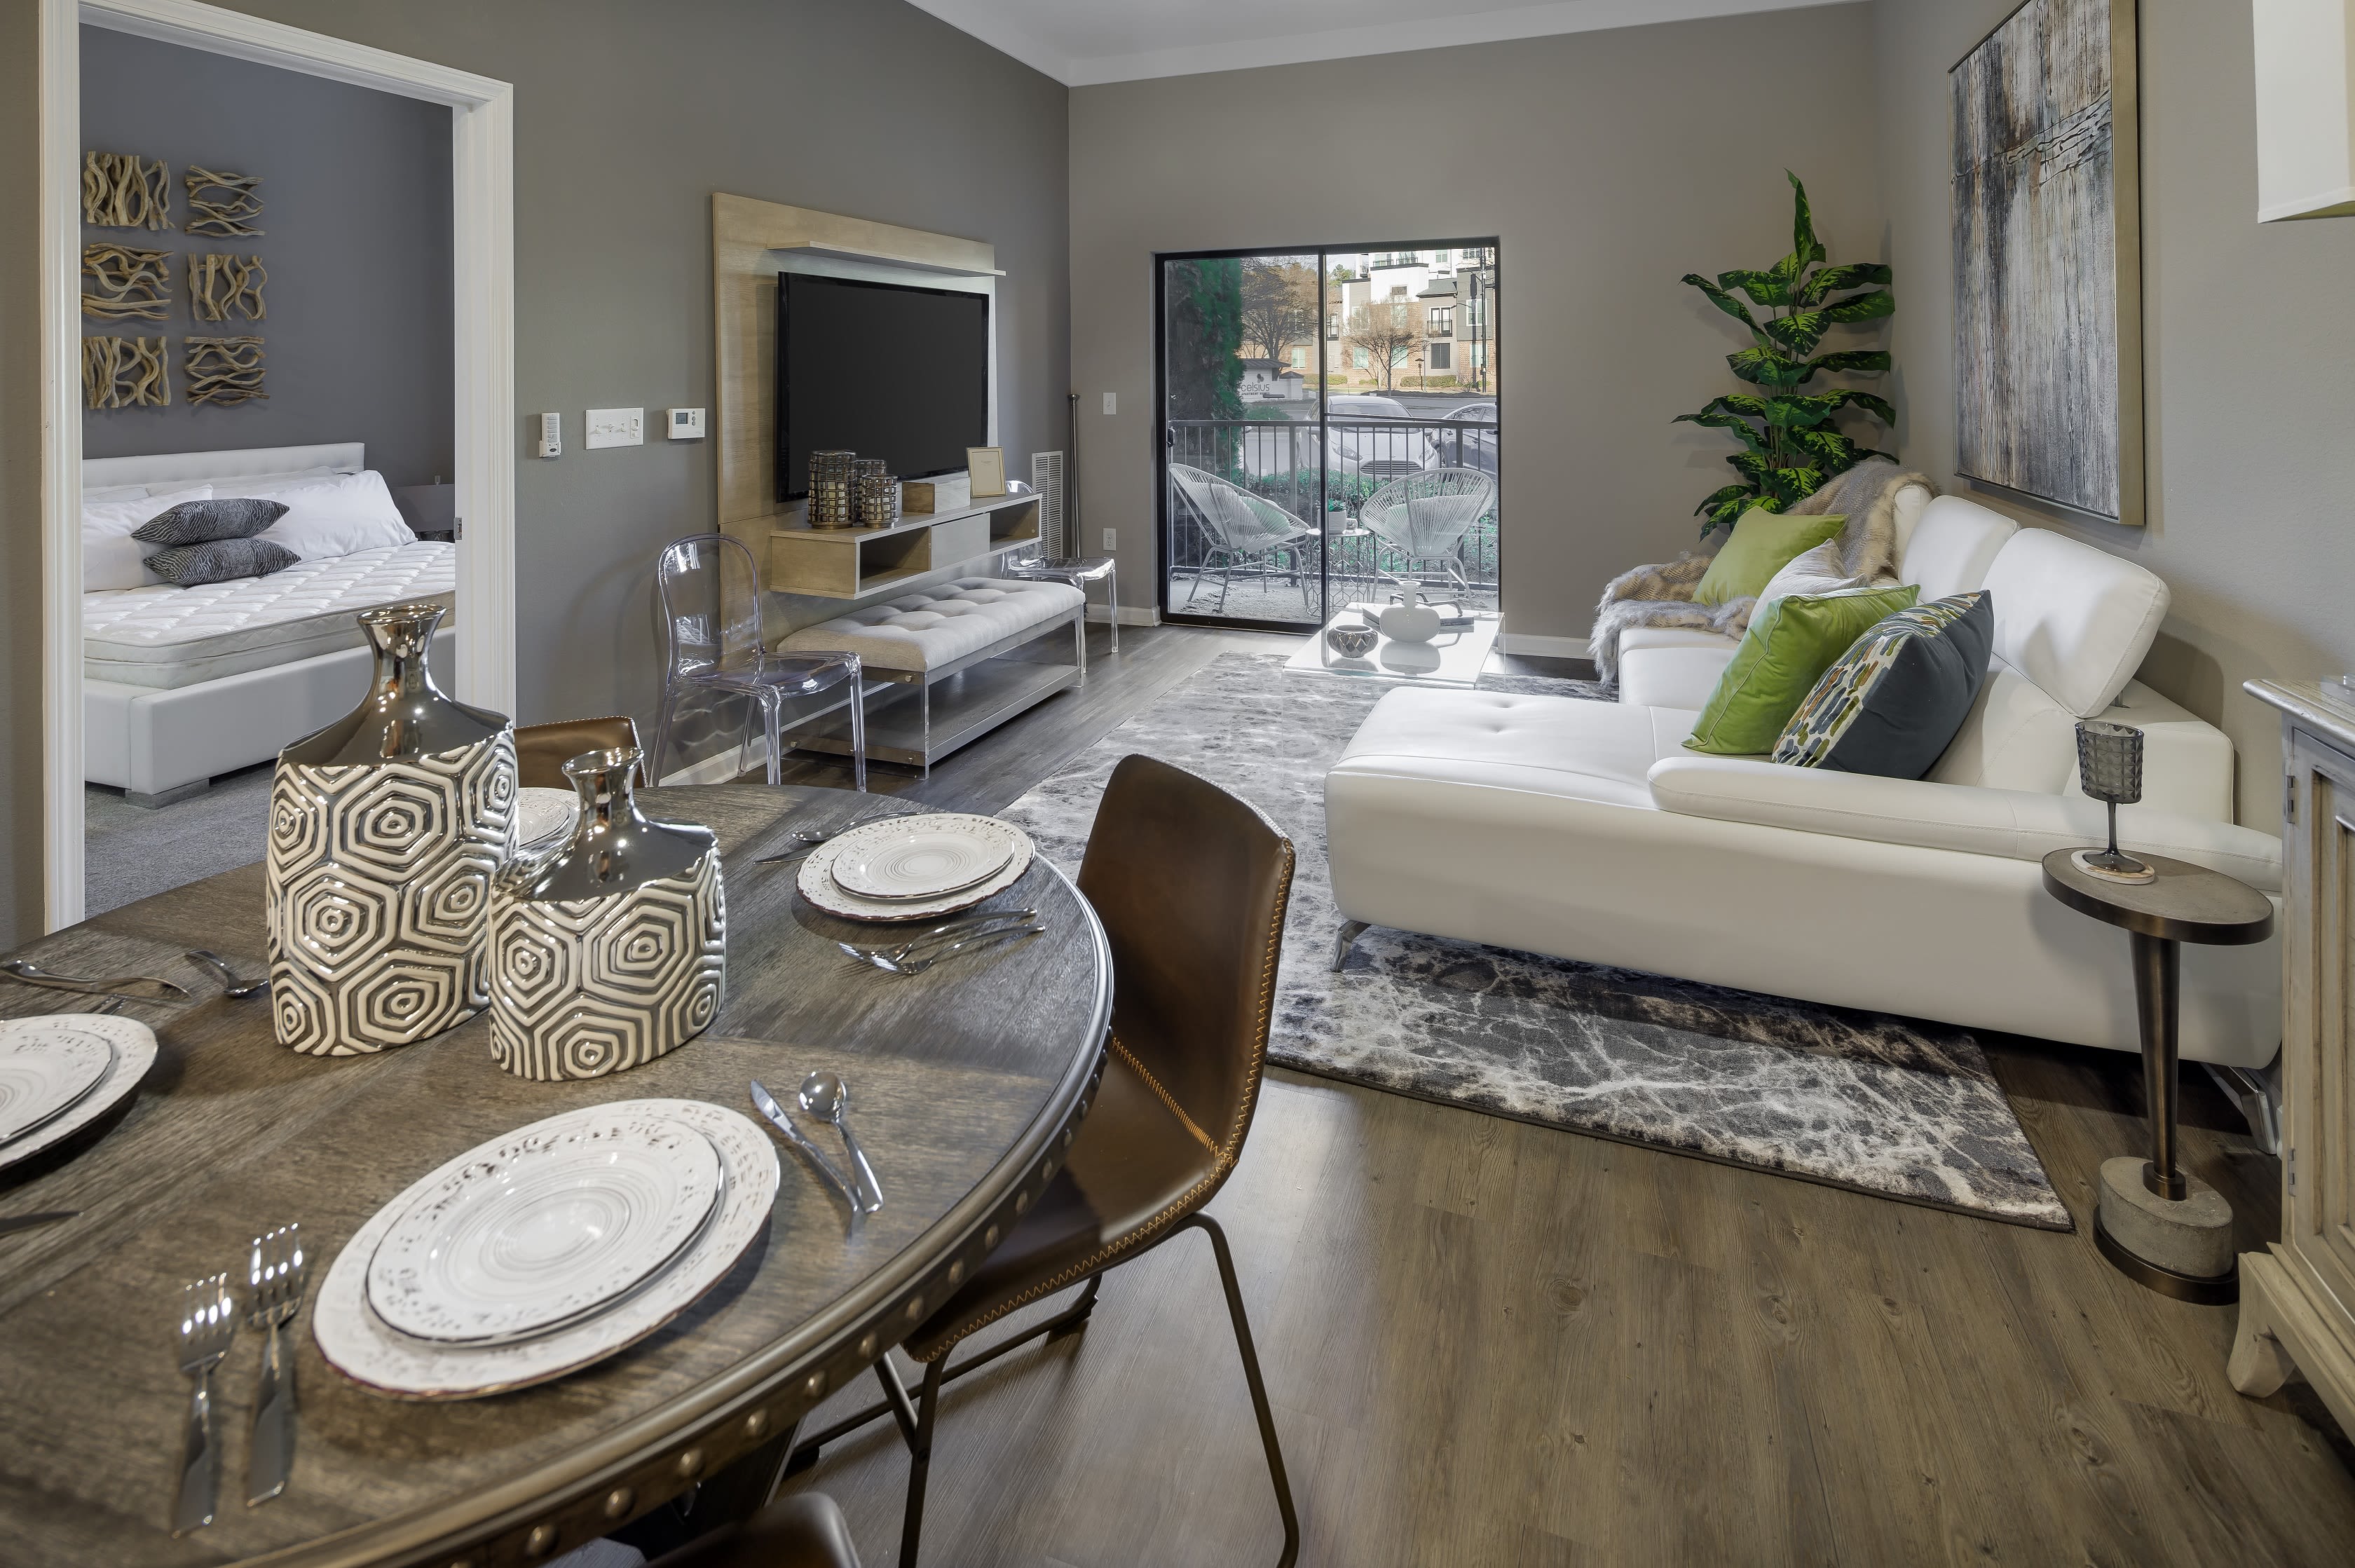 Well-furnished model home's dining and living area at Celsius Apartment Homes in Charlotte, North Carolina